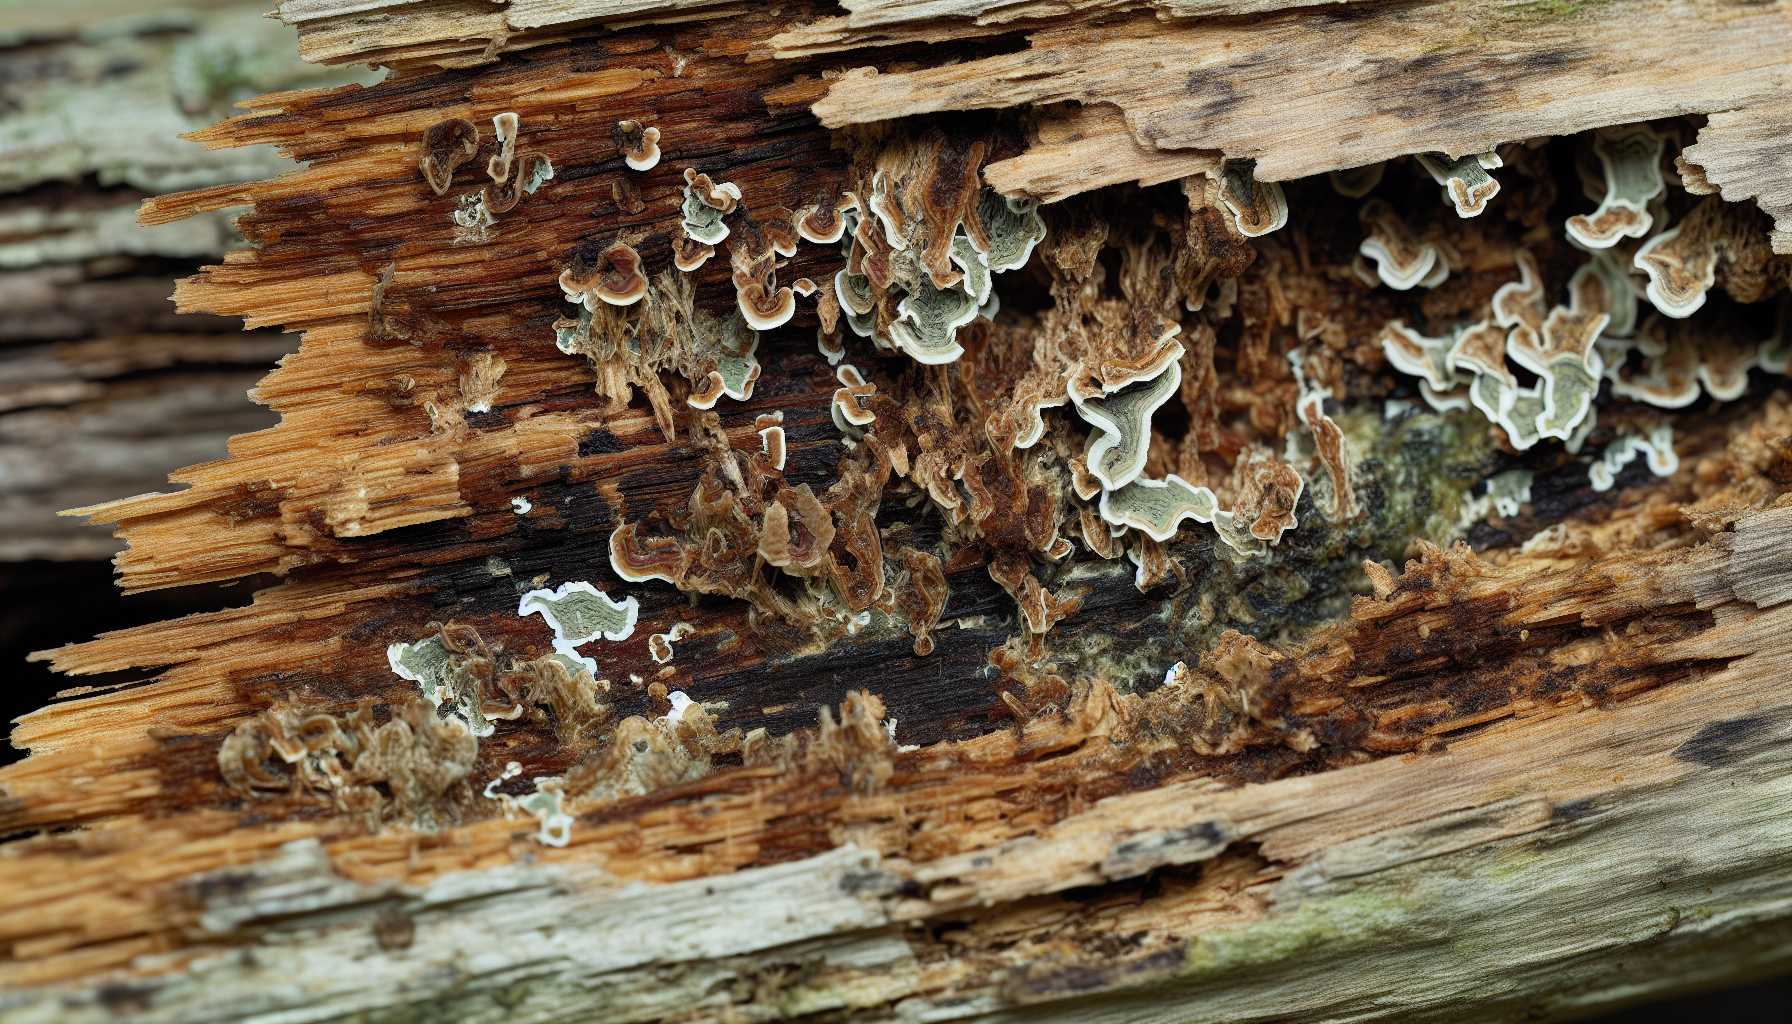 Decaying wood with visible wood decay fungi